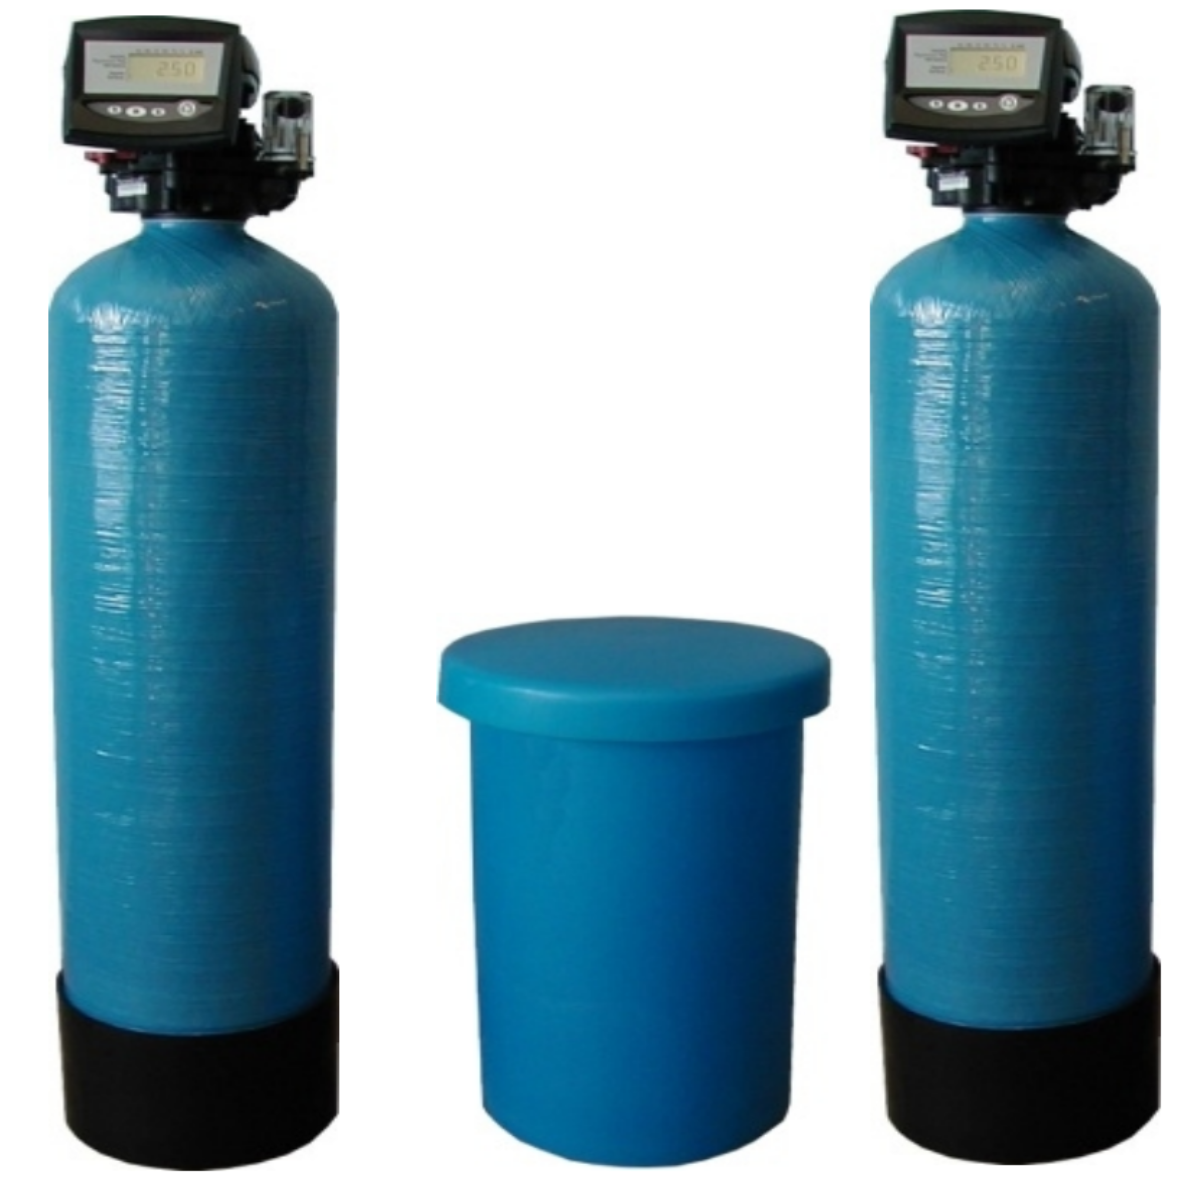 Duplex Autotrol 255 Meter Controlled Commercial Water Softener 10" x 54", 50 Litres